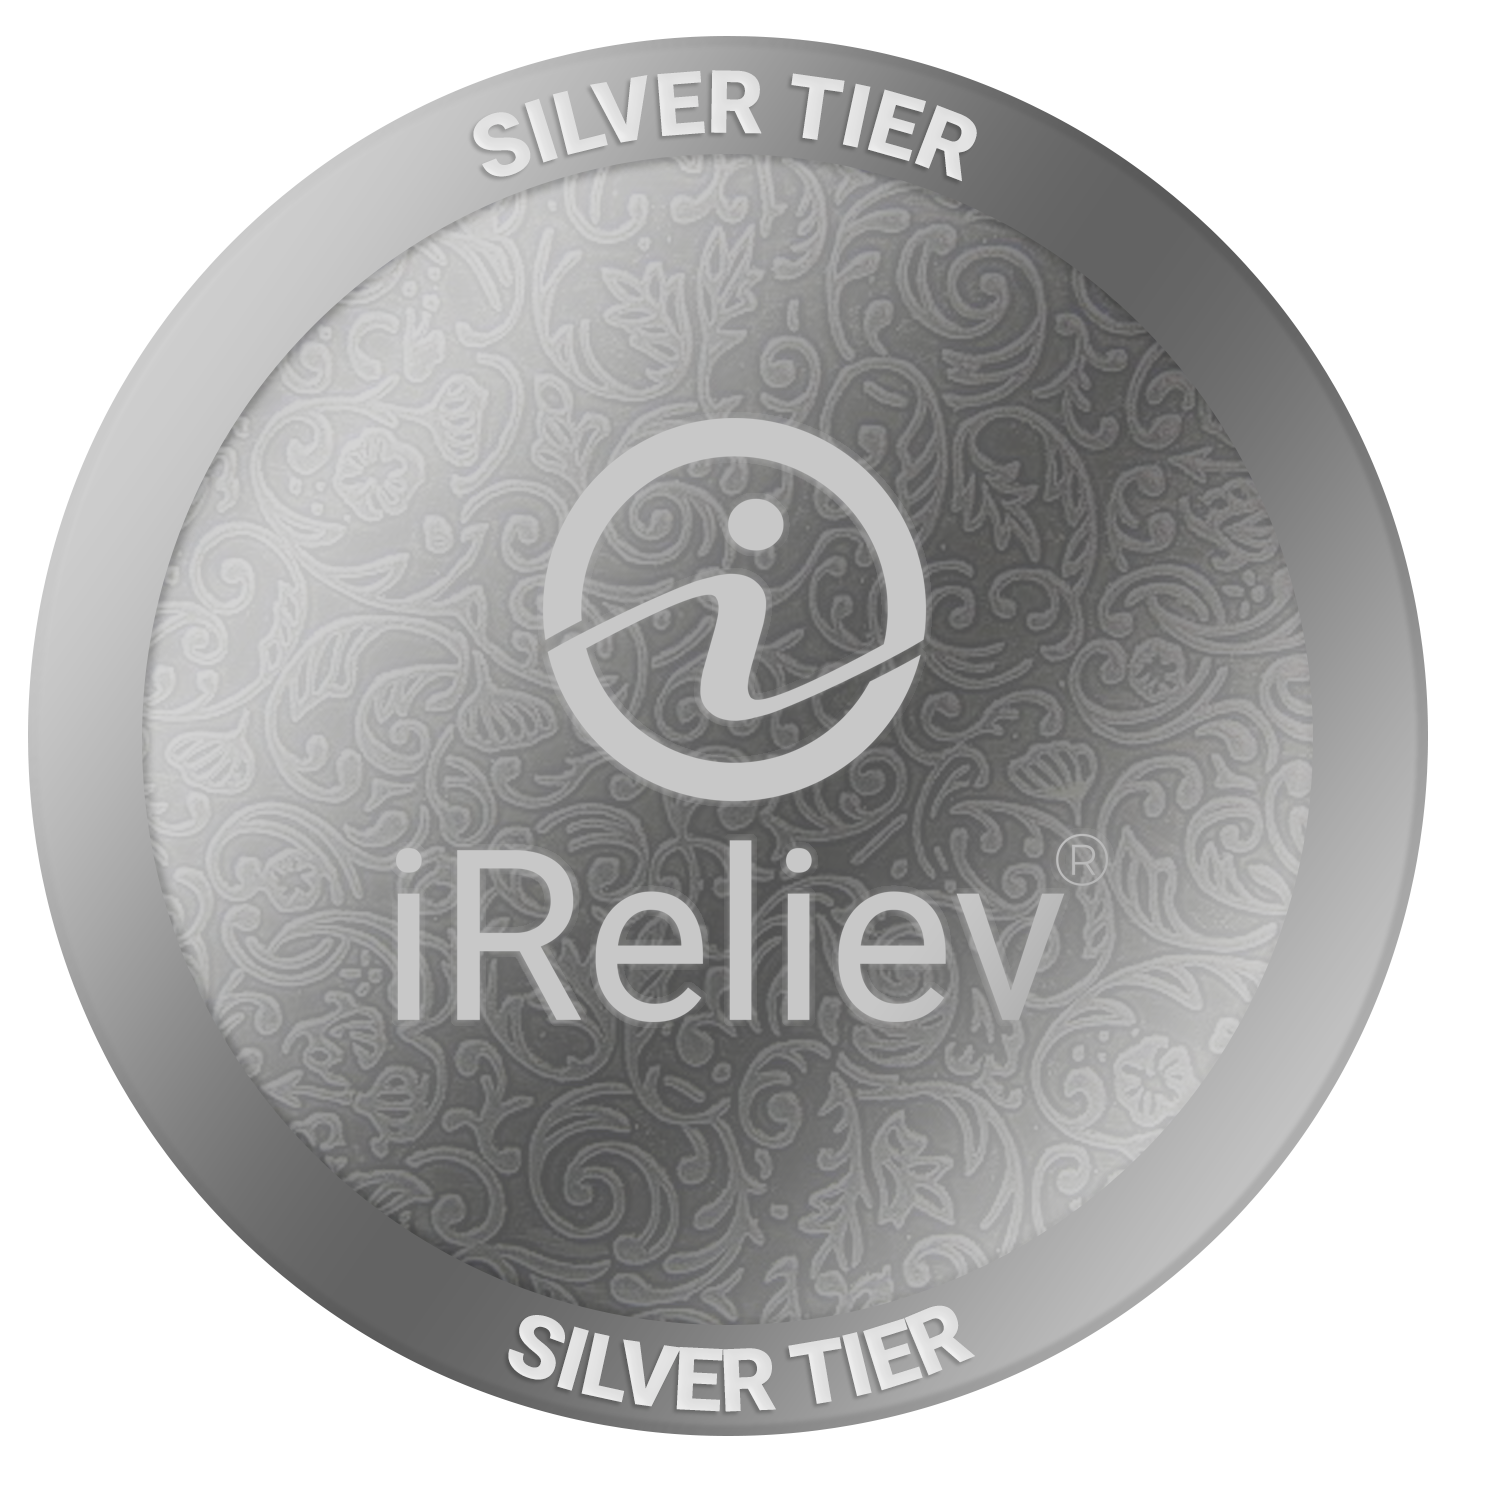 https://ireliev.com/wp-content/uploads/2021/08/Silver-coin.png